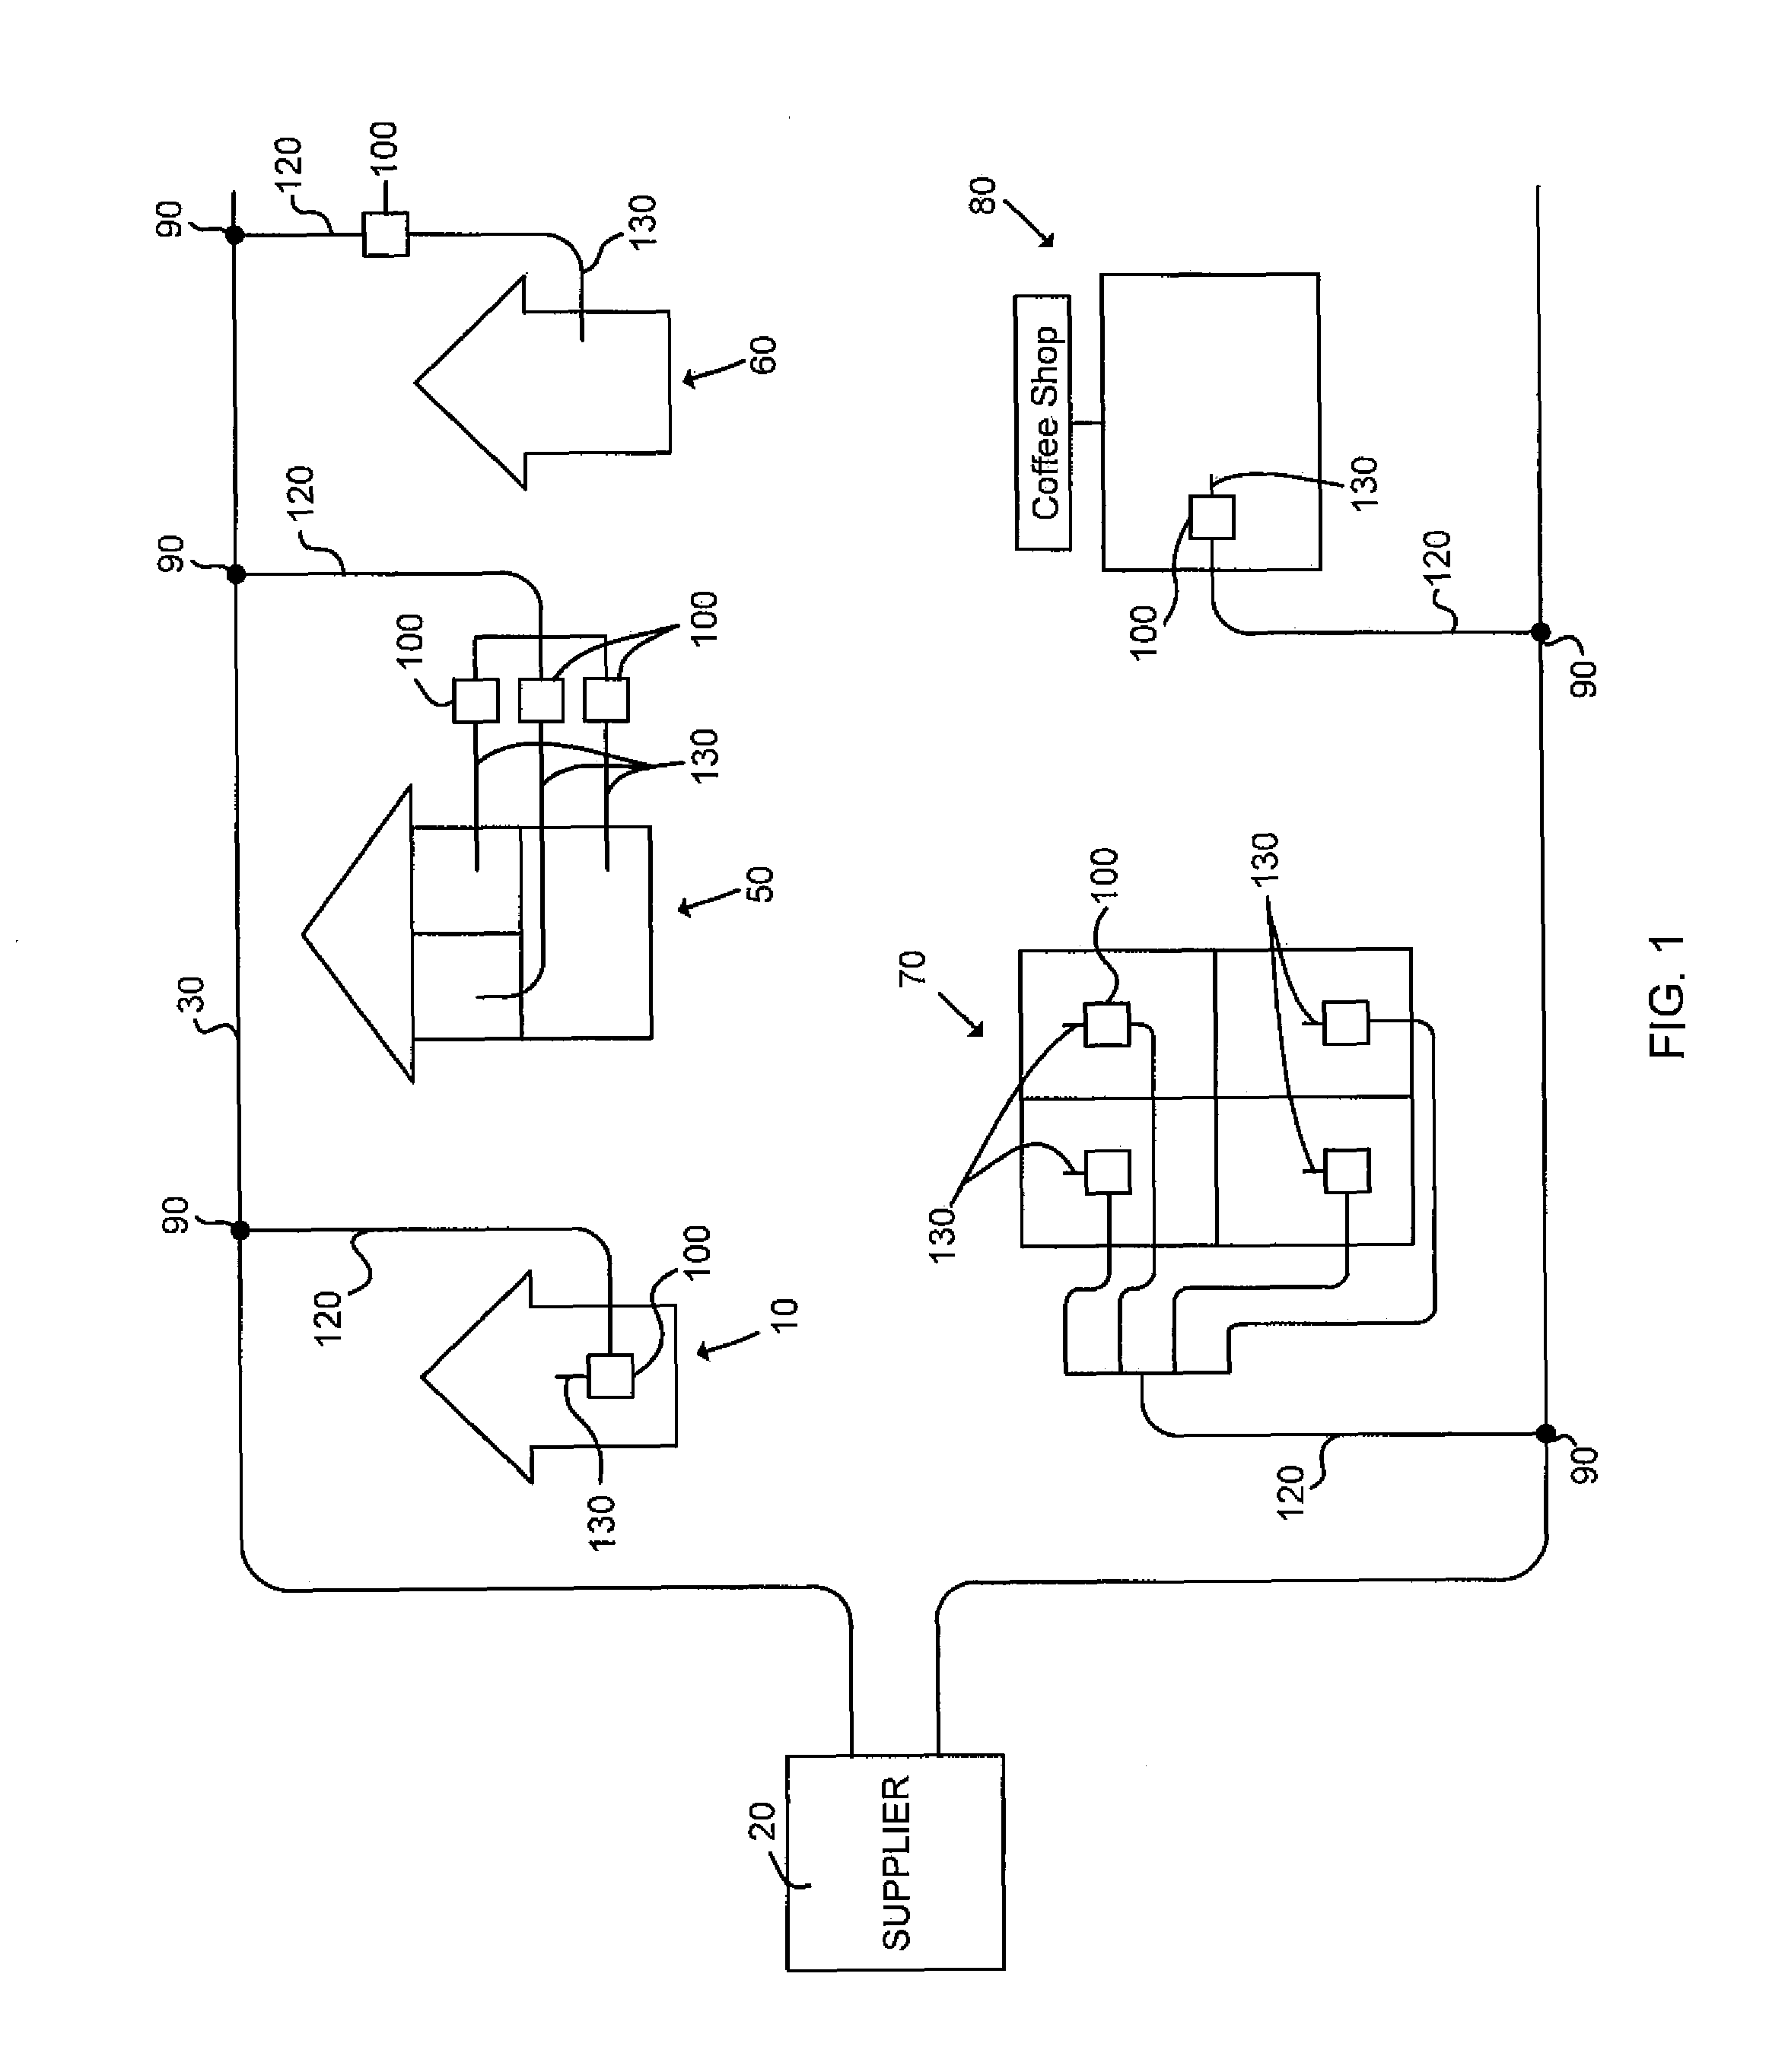 Downstream output level and/or output level tilt compensation device between CATV distribution system and CATV user